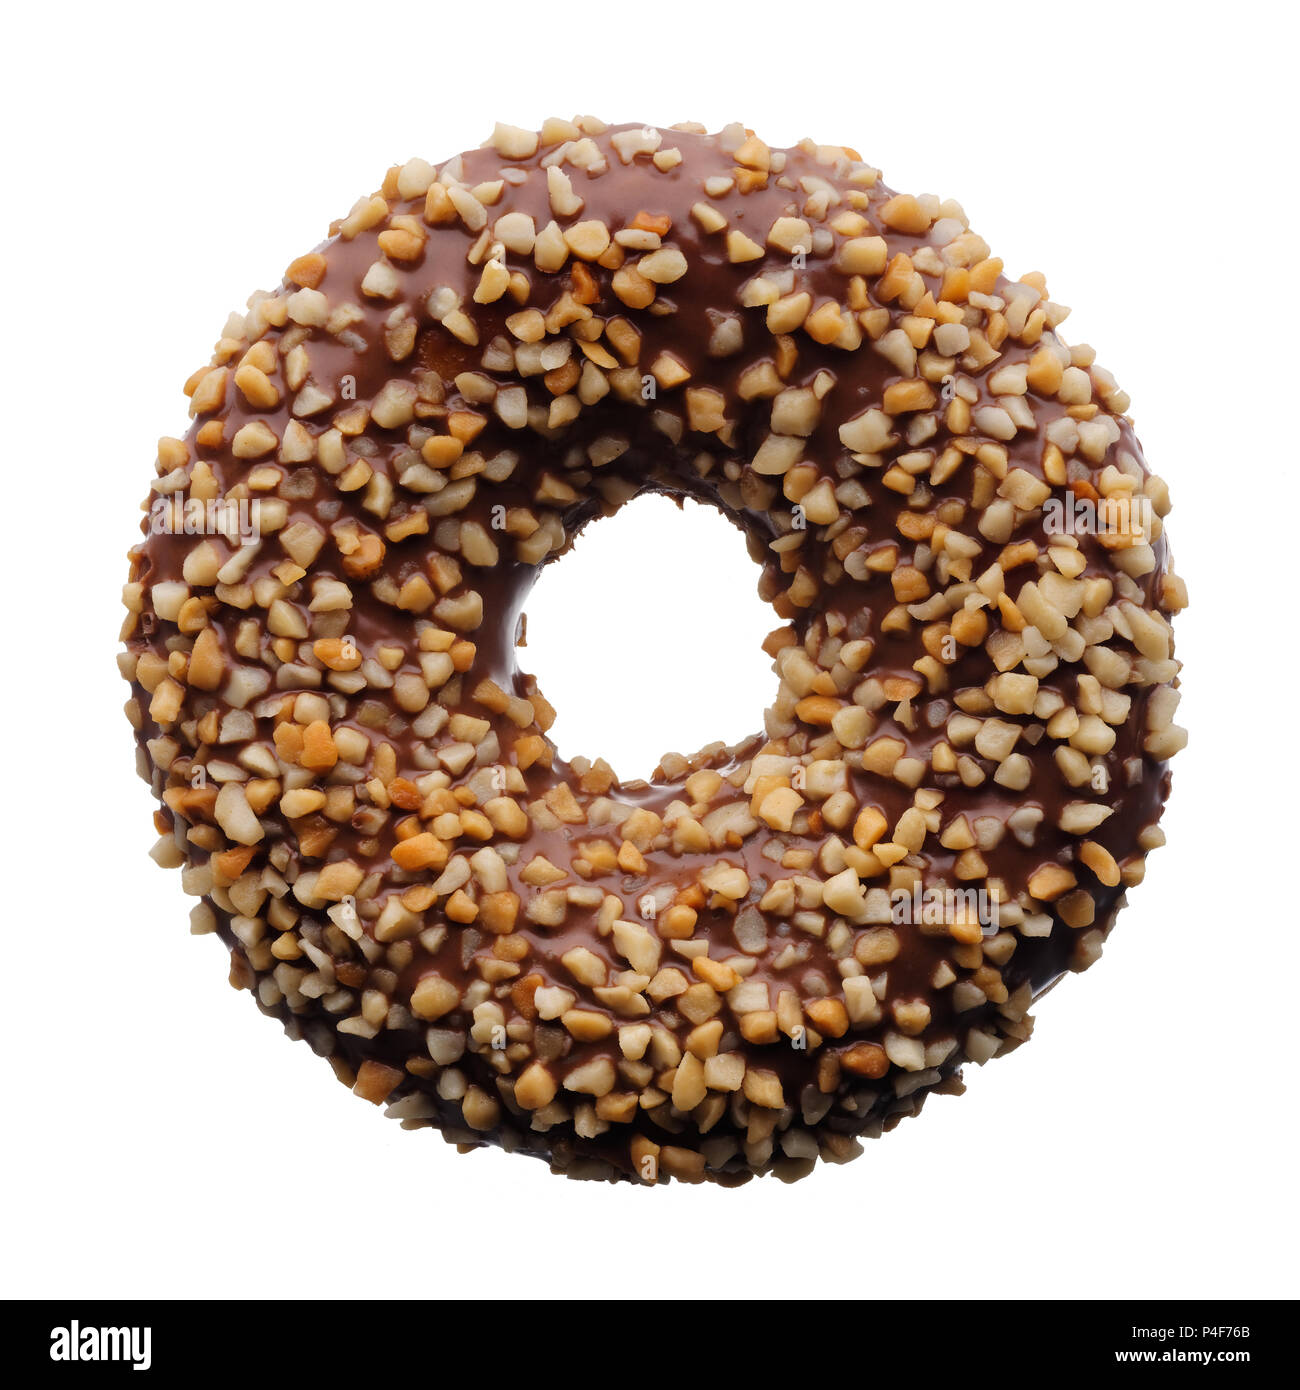 Food: single chocolate and crushed nuts donut, isolated on white background Stock Photo